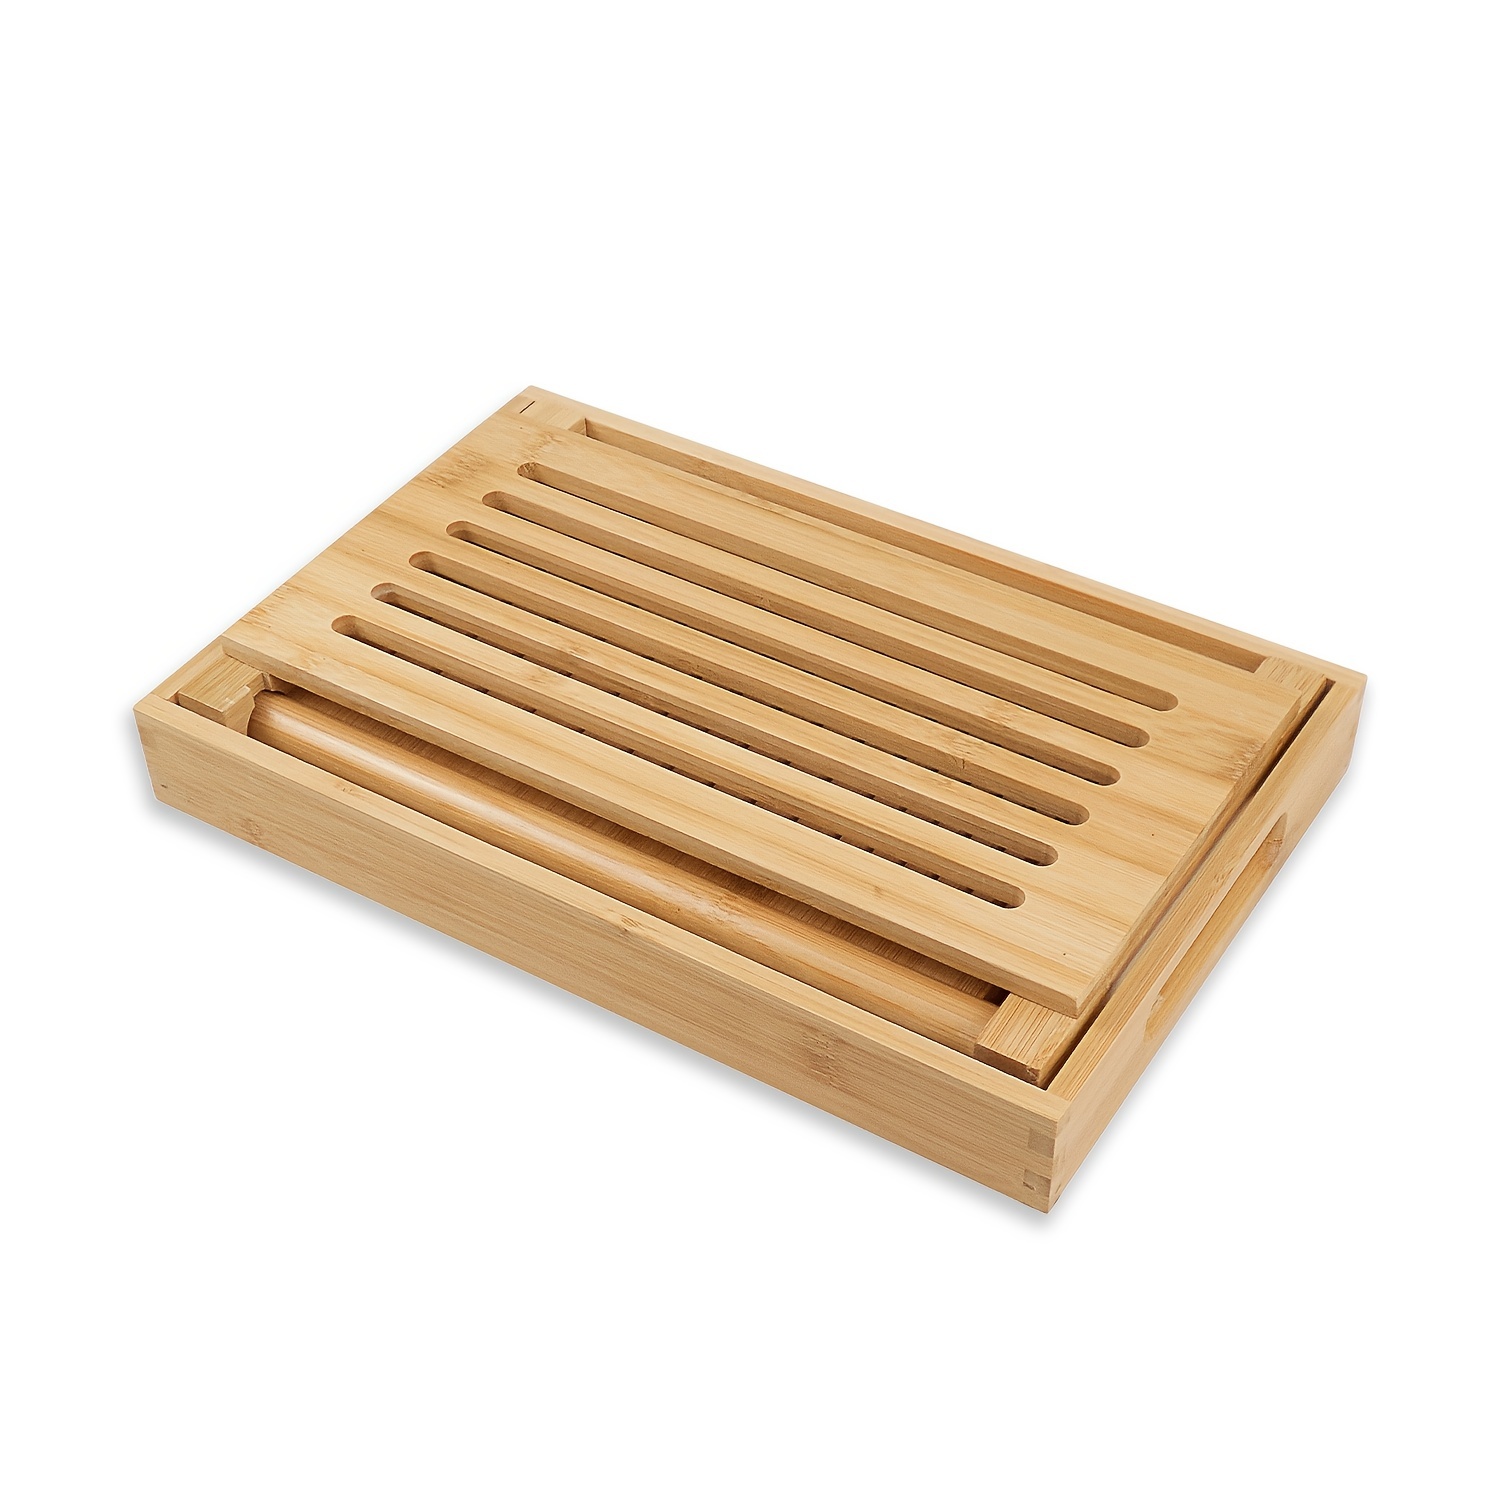 Bamboo Bread Slicer Bread Cutting Tool Foldable For Homemade Bread Loaf  Cakes